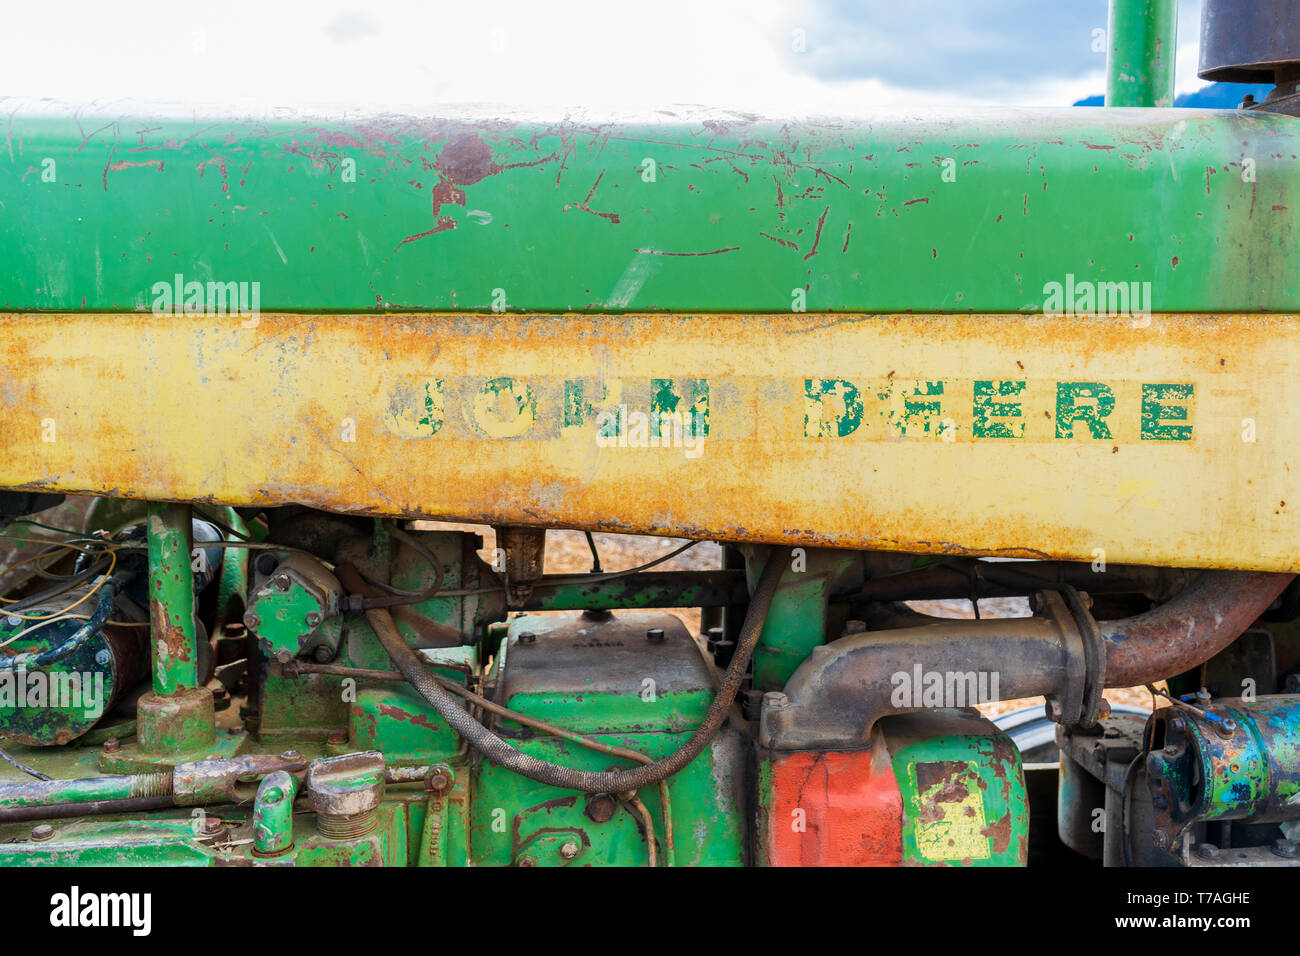 Side of an old, worn down classic tractor, showing remnants of the John Deere logo word mark in green and yellow, and tractor engine parts. Stock Photo